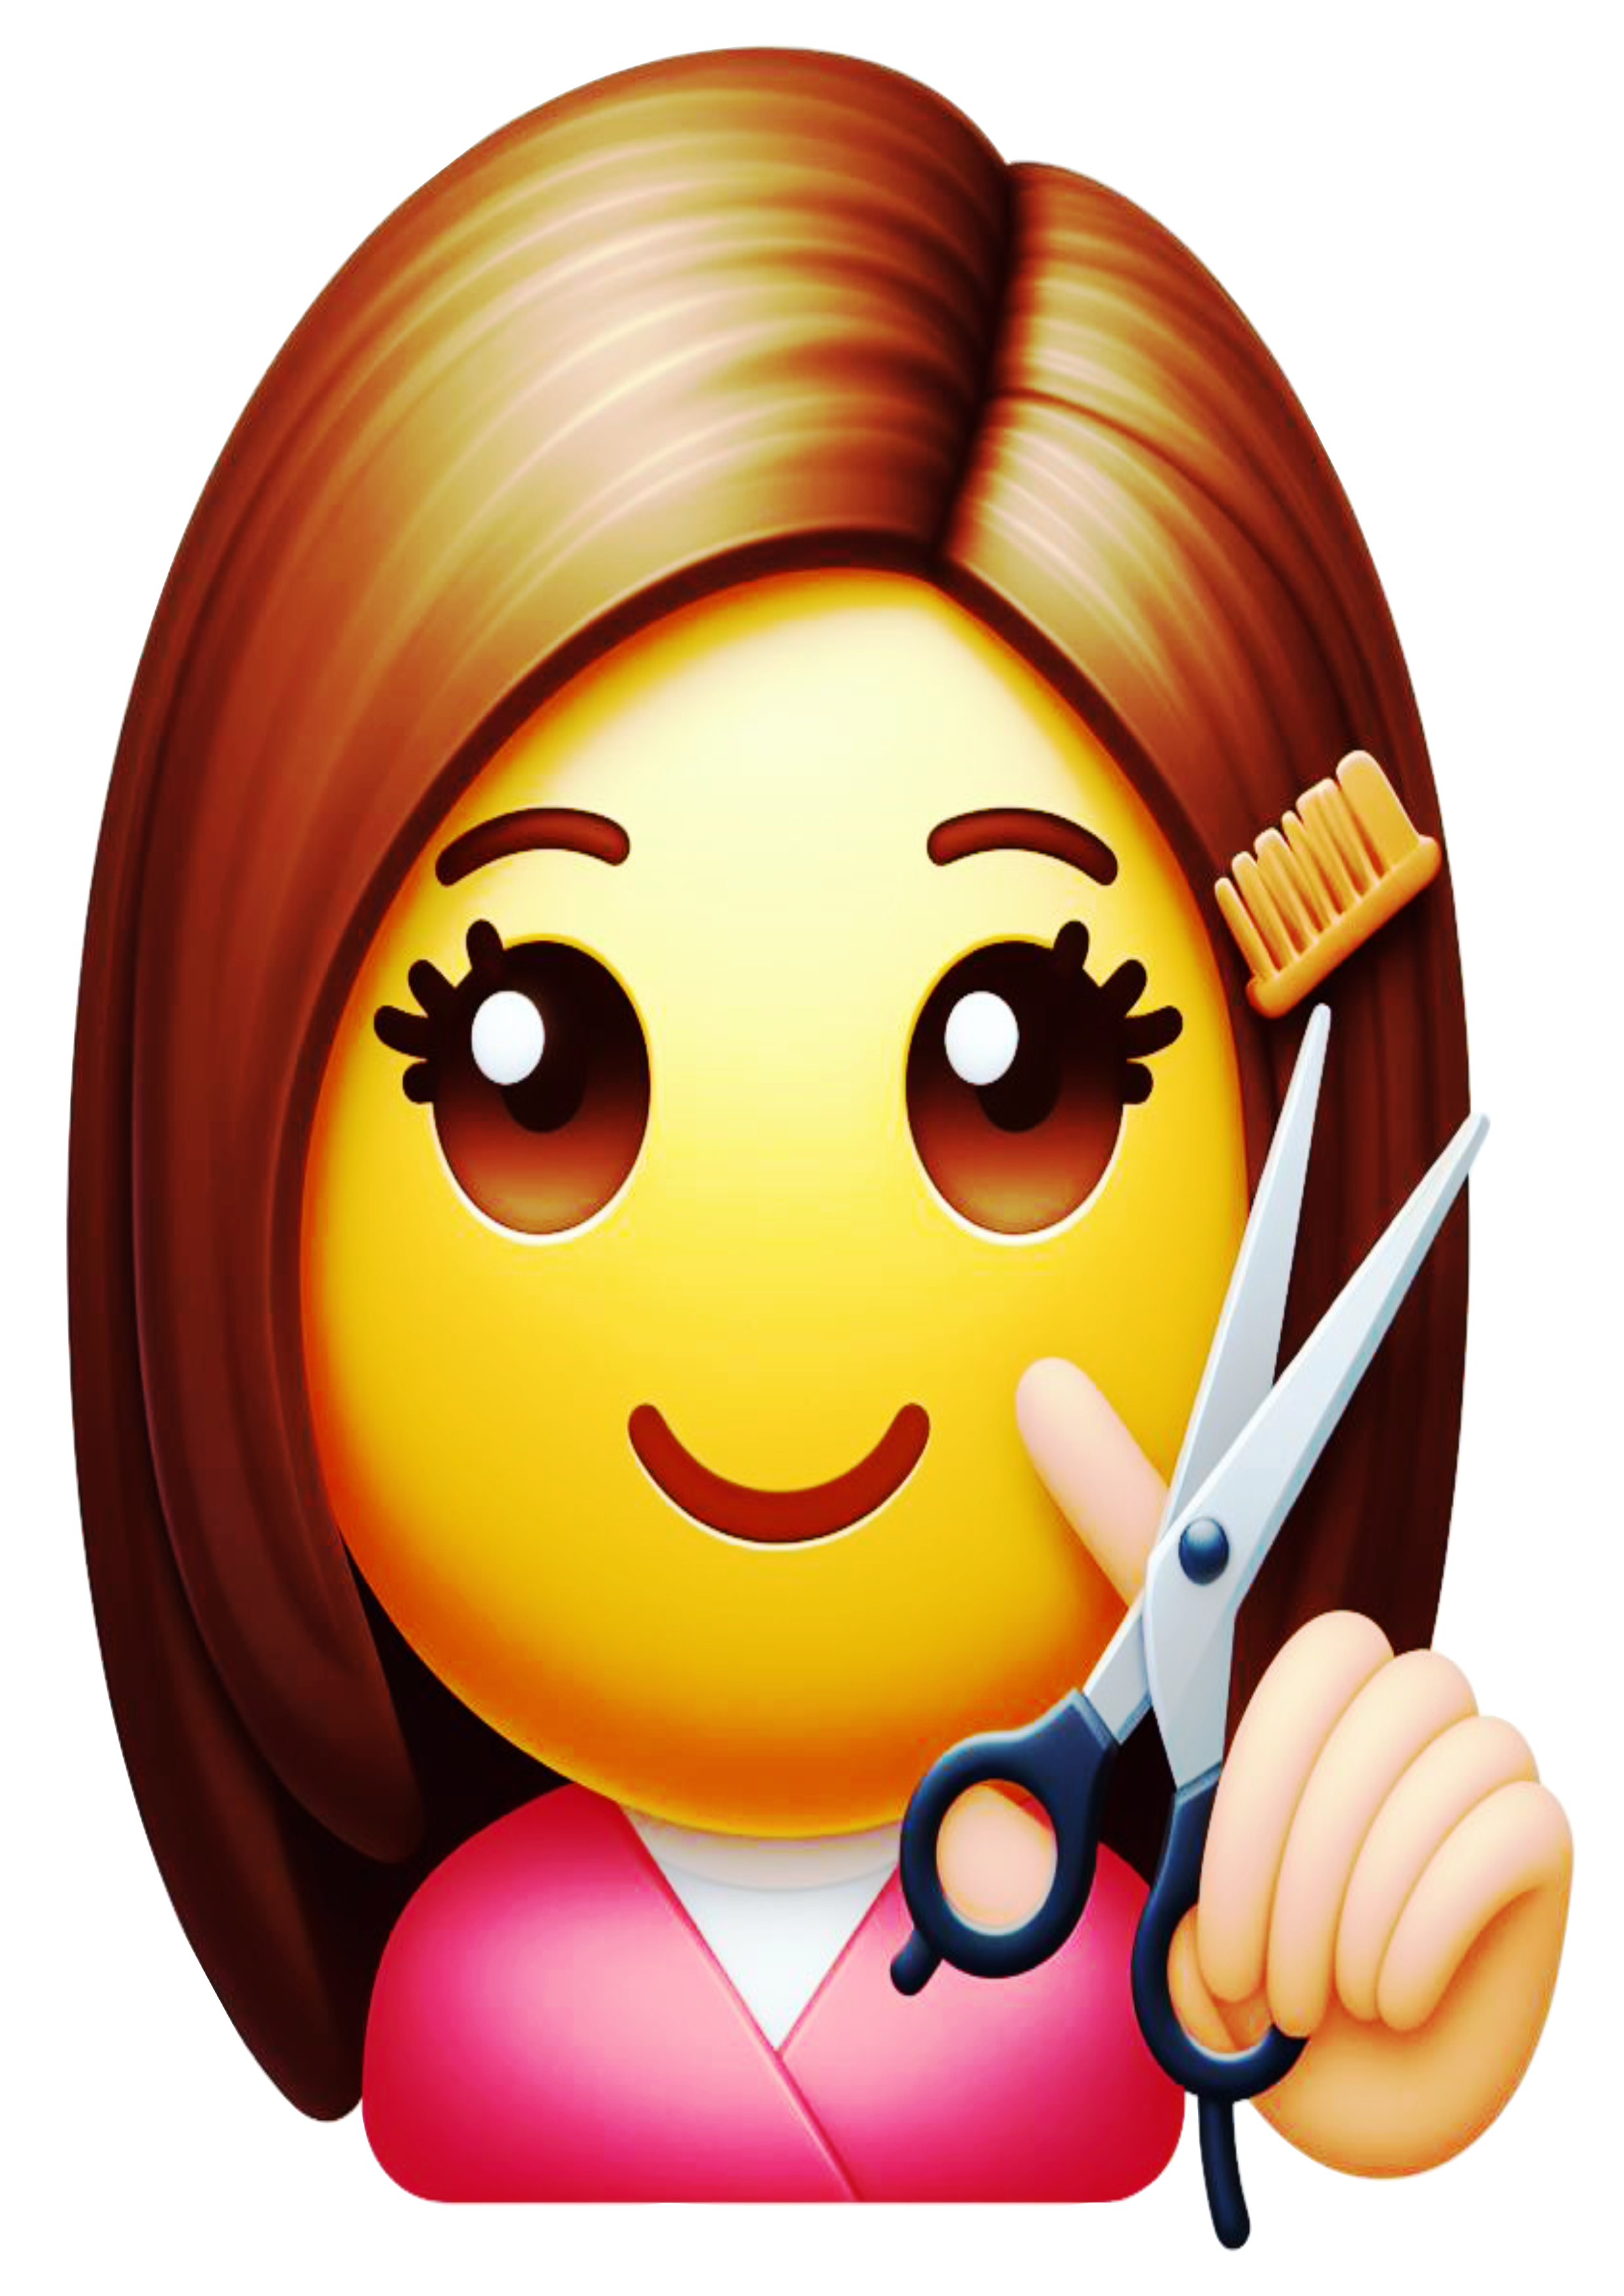 Funny stickers hairdresser emojis for whatsapp facebook and instagram graphic arts free download png transparent background illustration